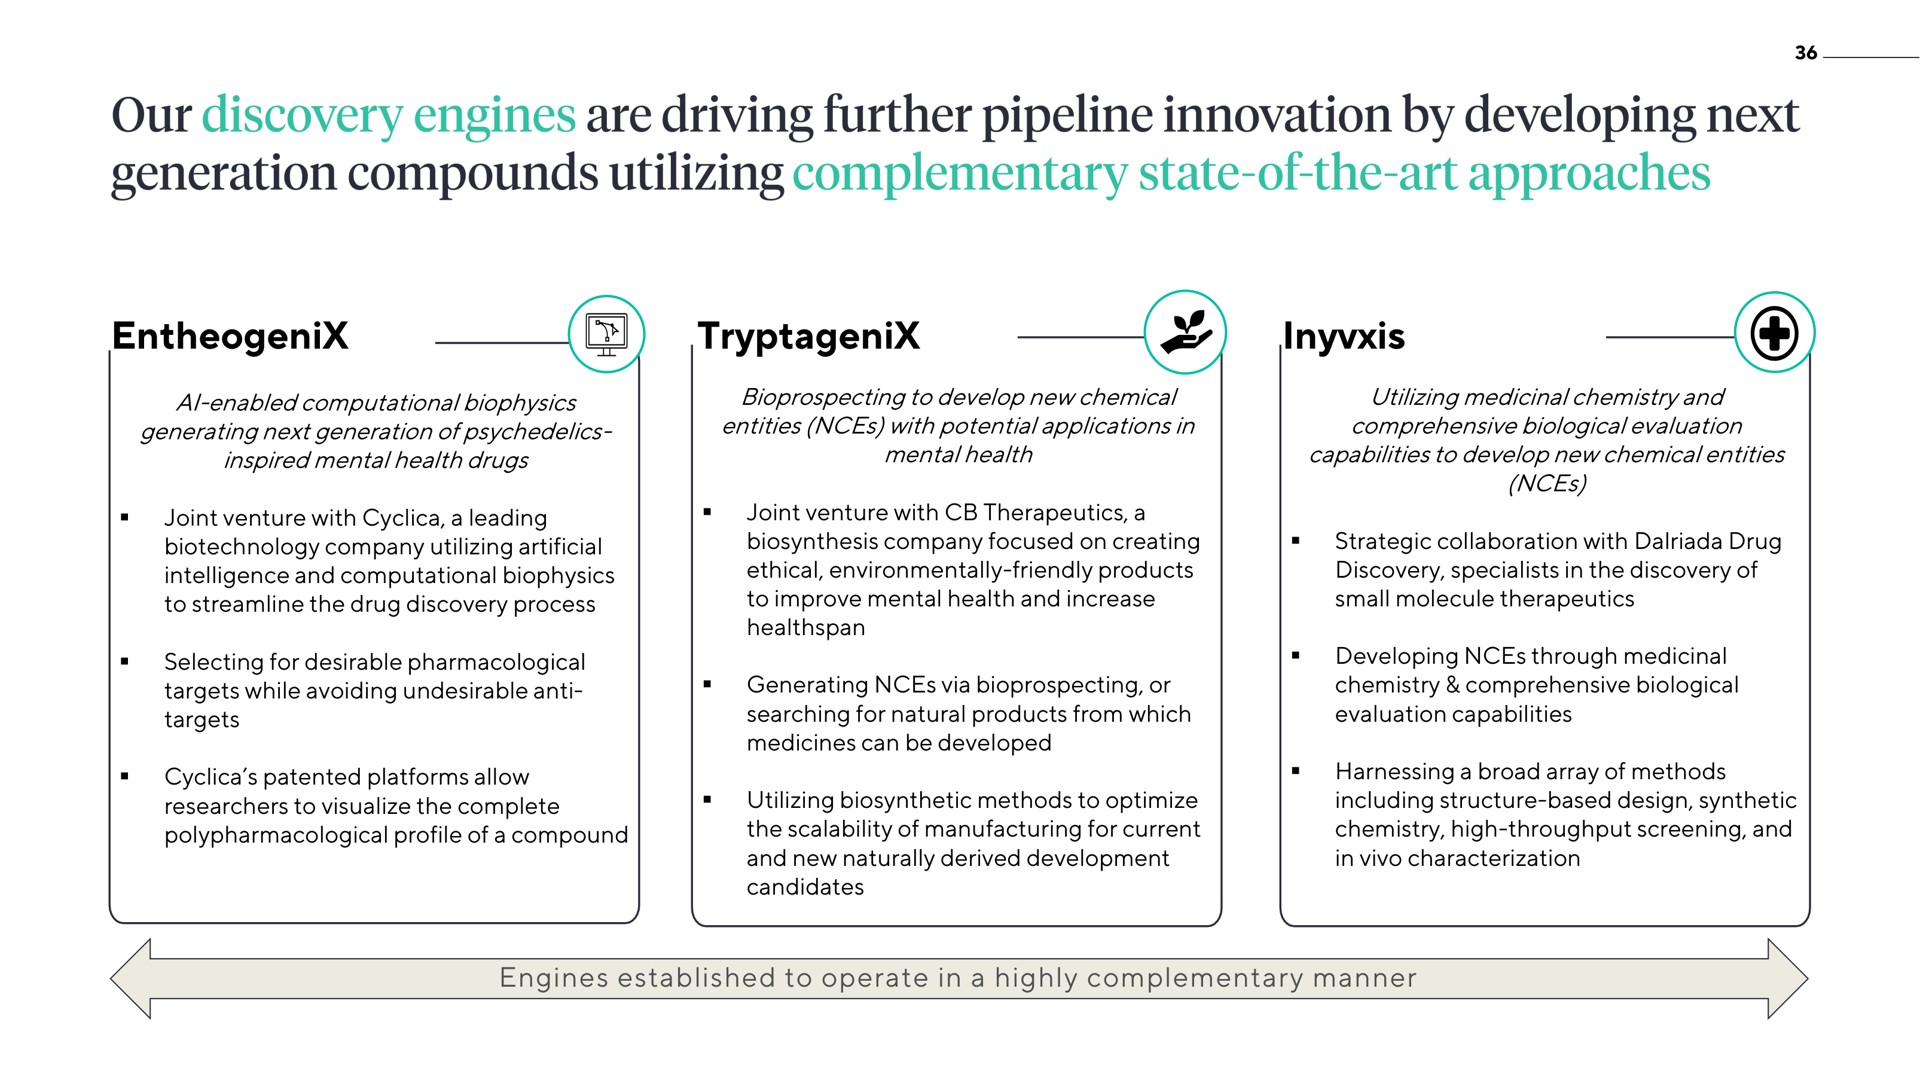 engines established to operate in a highly complementary manner our discovery are driving further pipeline innovation by developing next generation compounds utilizing state of the art approaches | ATAI